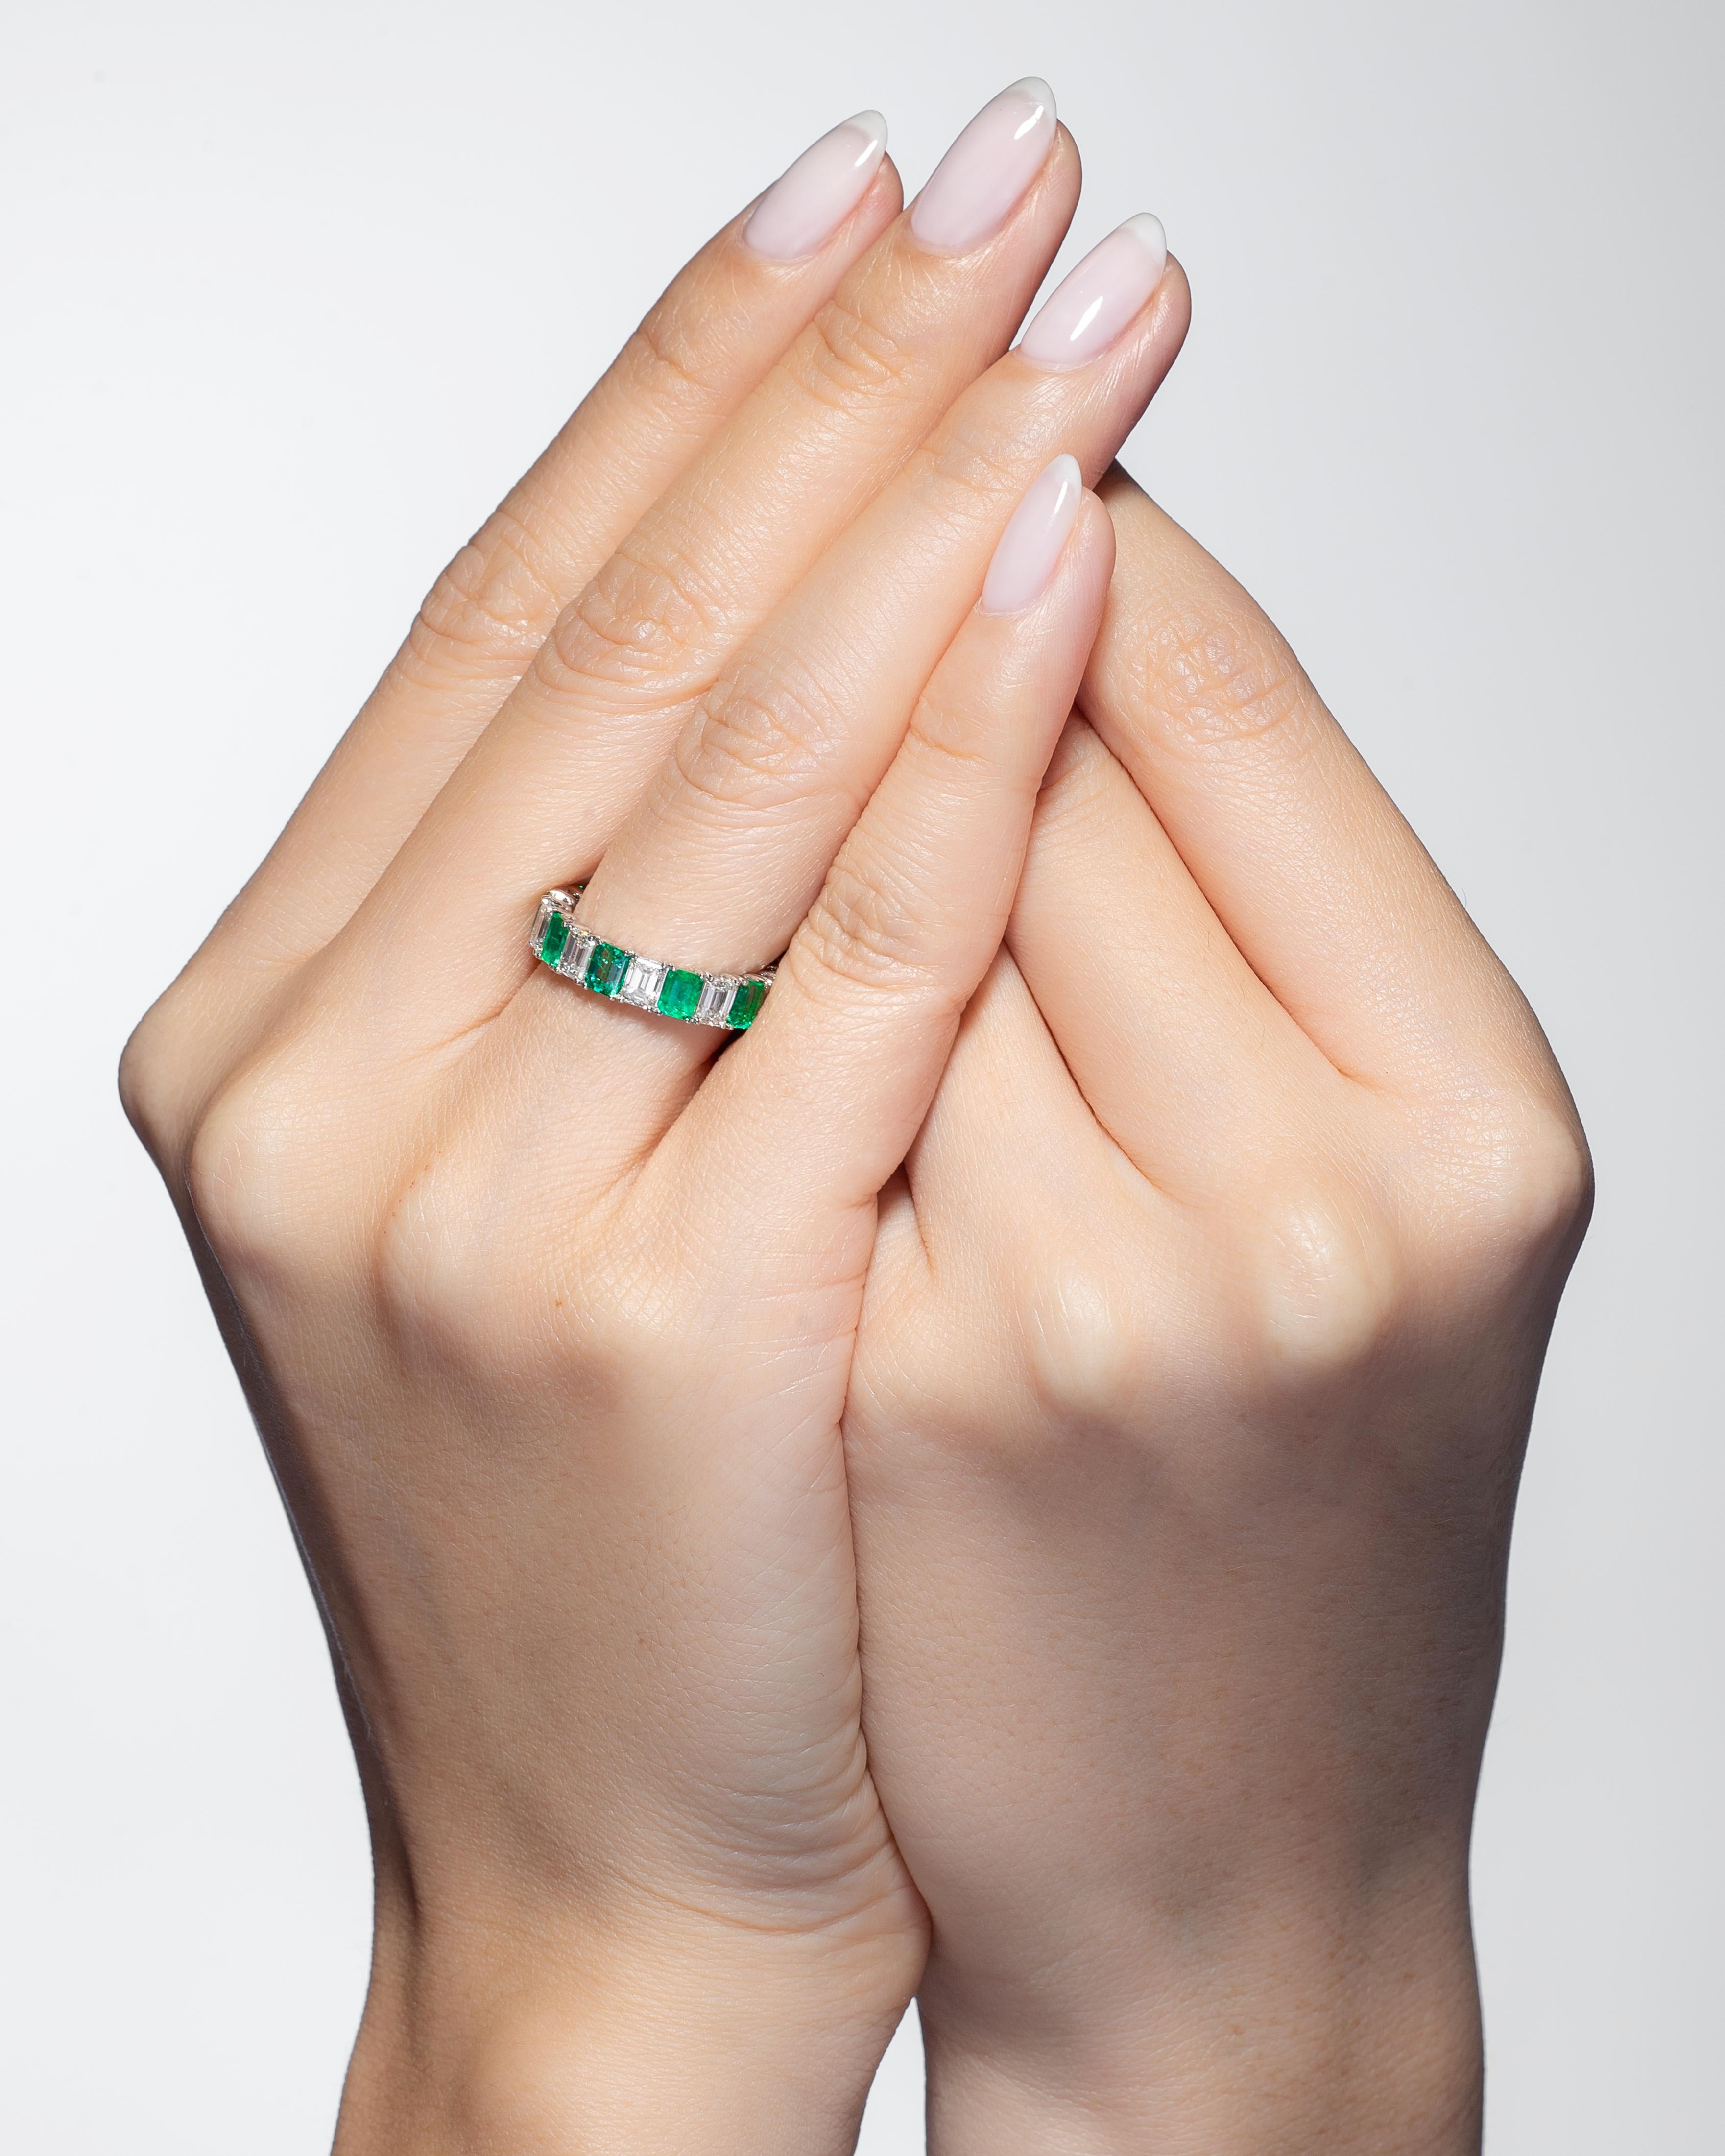 Emeralds are a true timeless classic. Their facets stand tall like an eternal hall of mirrors. This eternity band features 1.89 carats of Zambian green Emeralds and 2.34 carats of White Emerald Cut Diamonds. In total, the eternity band has 4.23